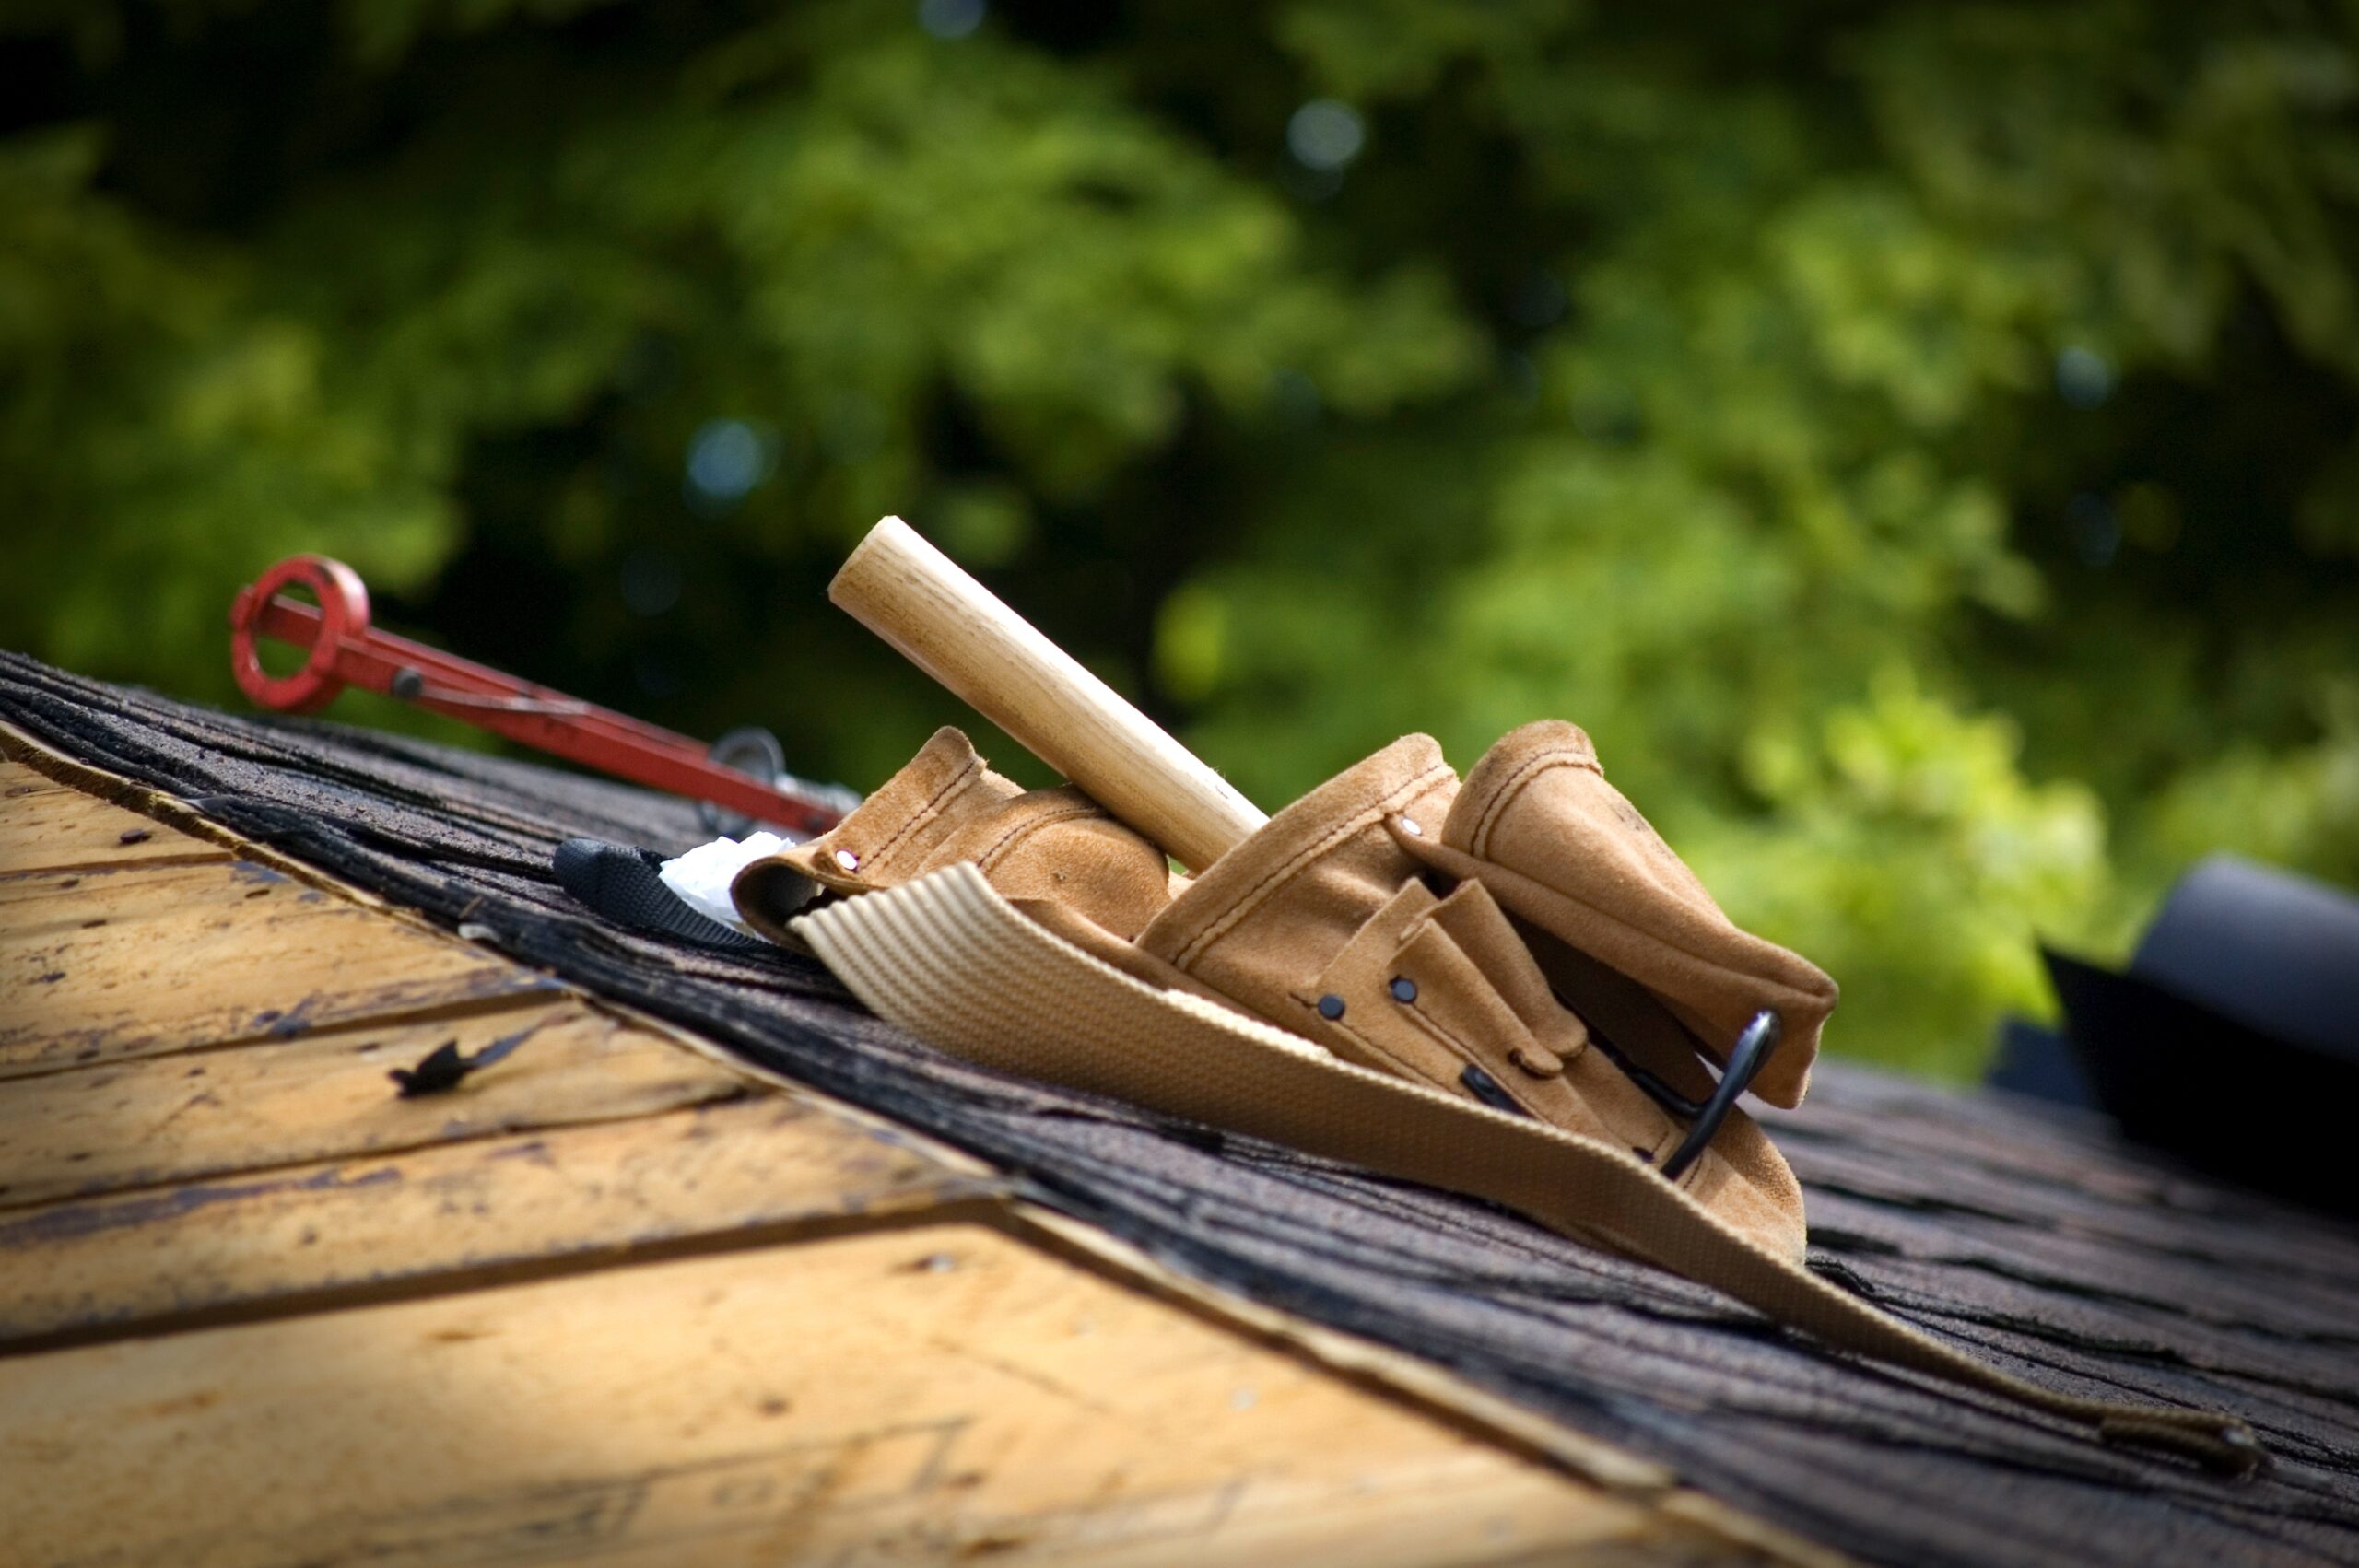 finding a professional roofing company